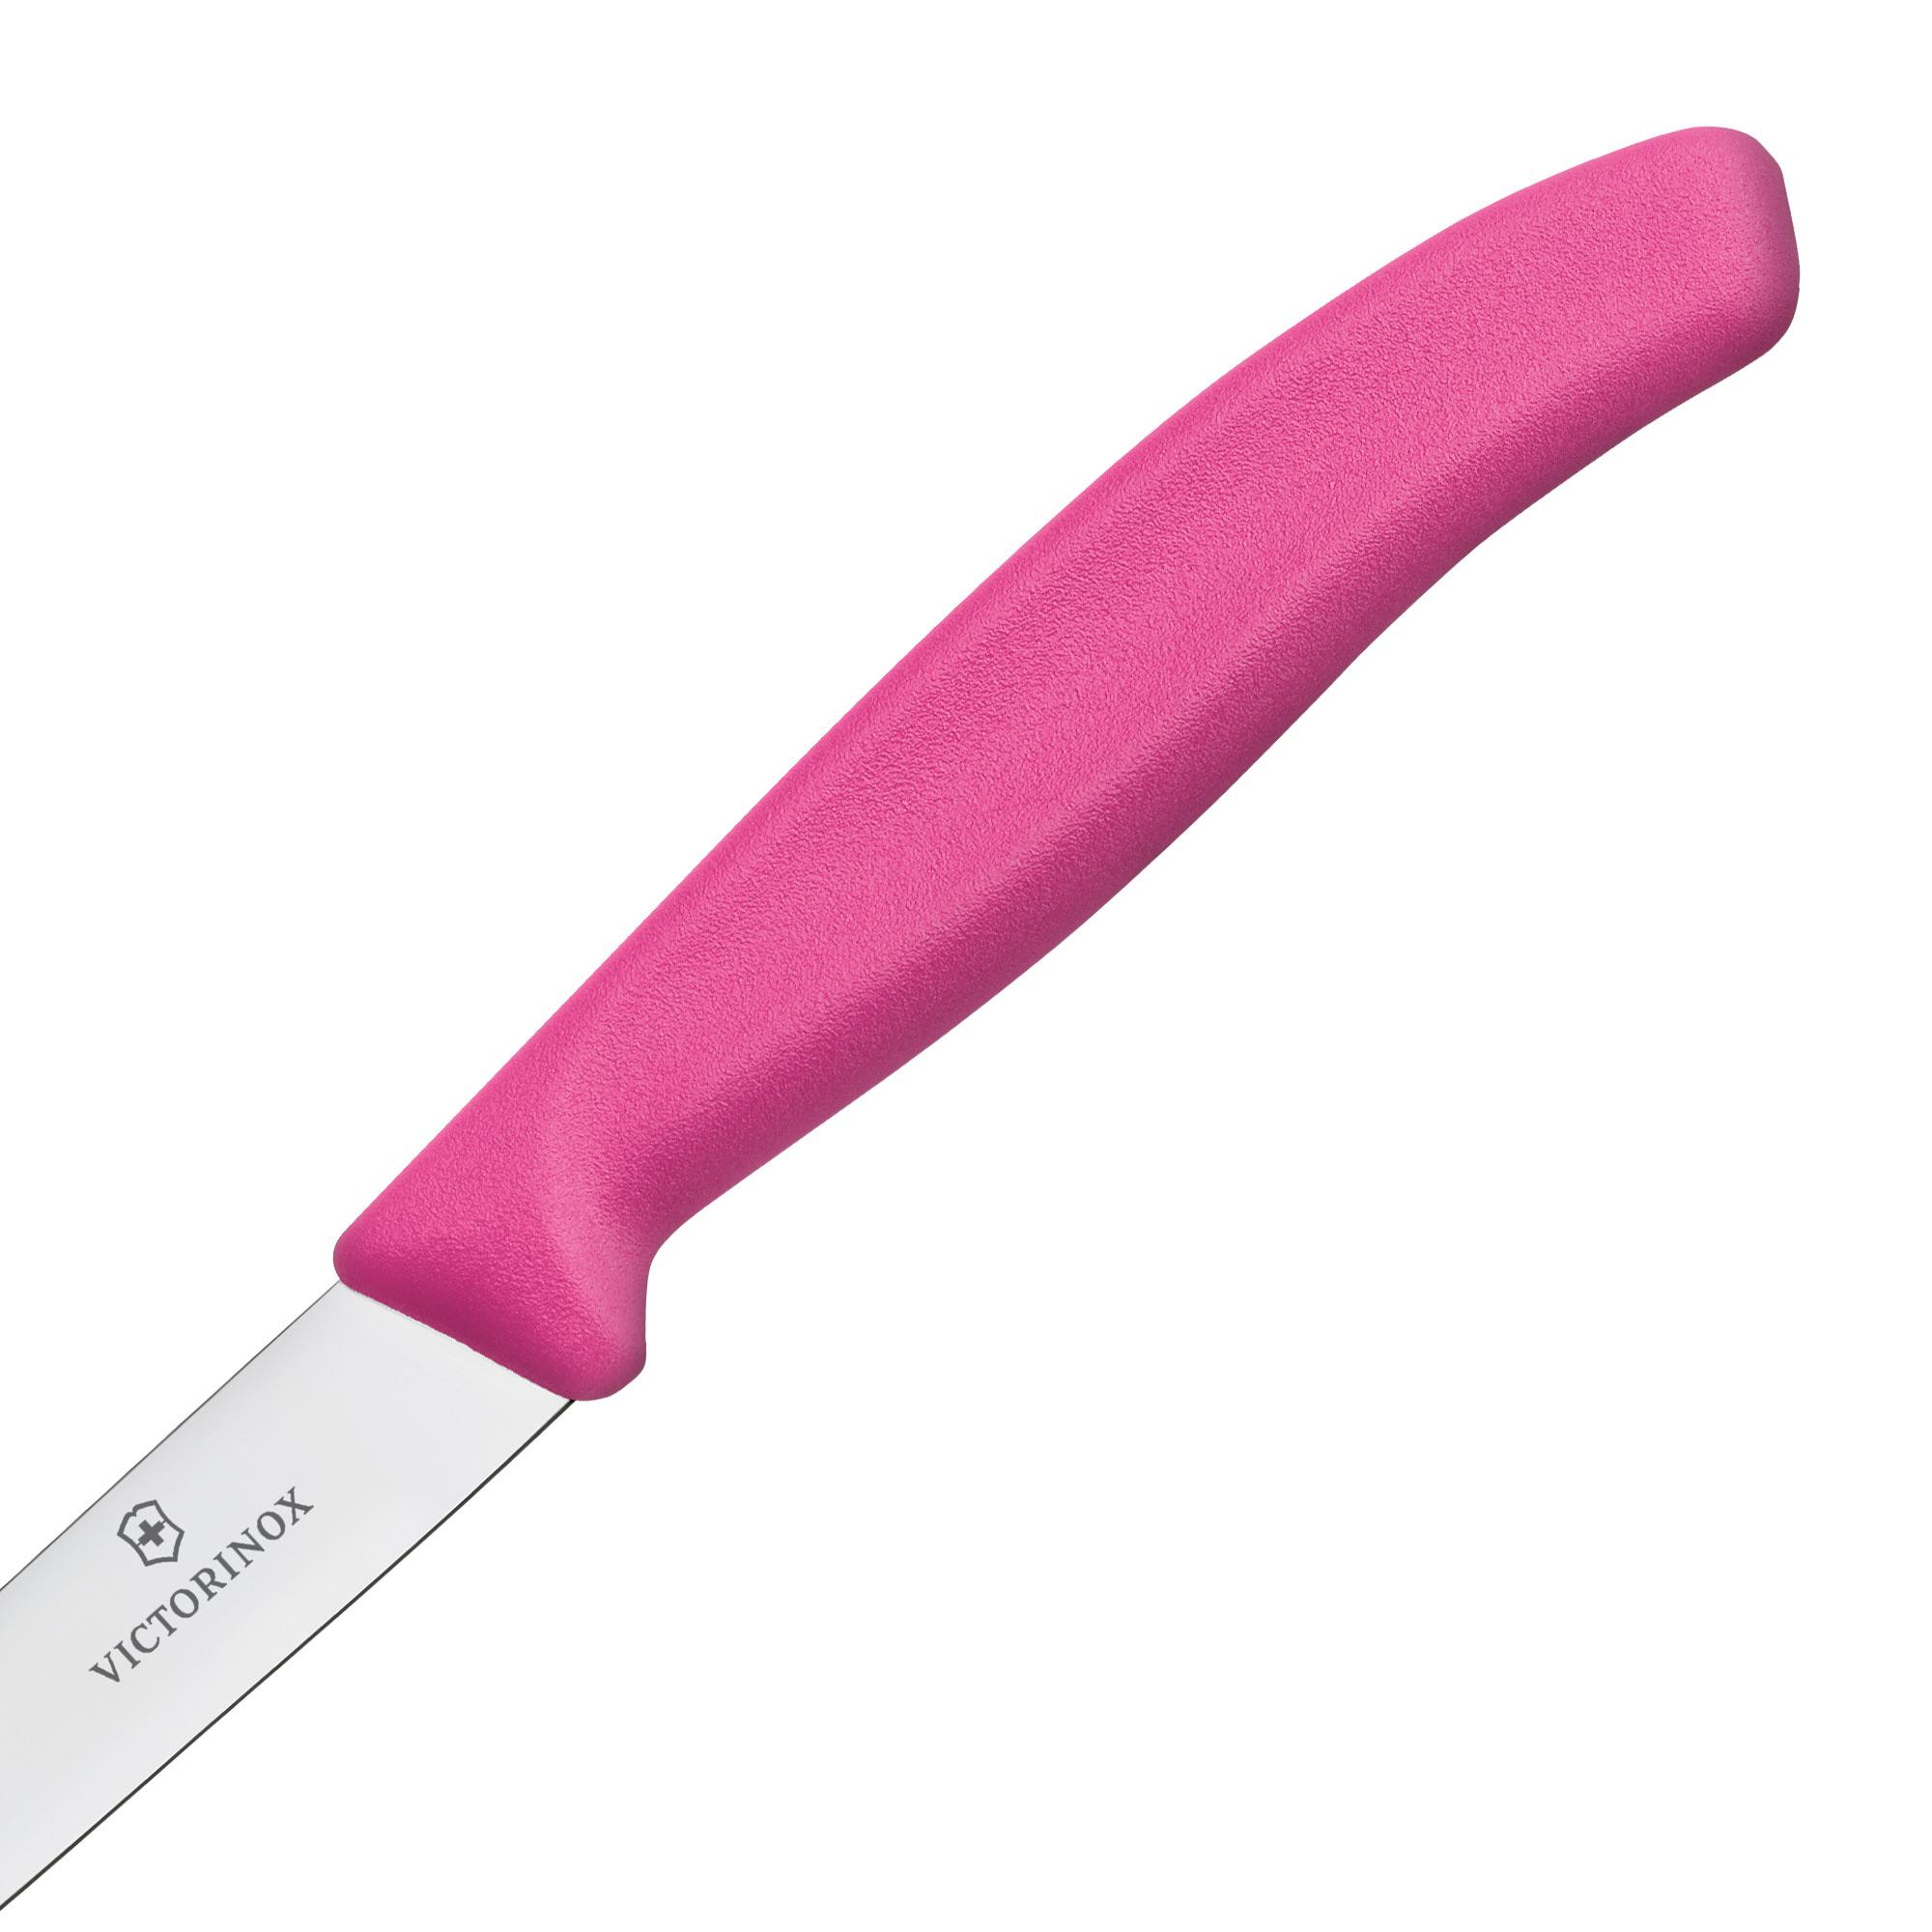 Victorinox Swiss Classic Pointed Tip Vegetable Knife 10cm Pink Image 3